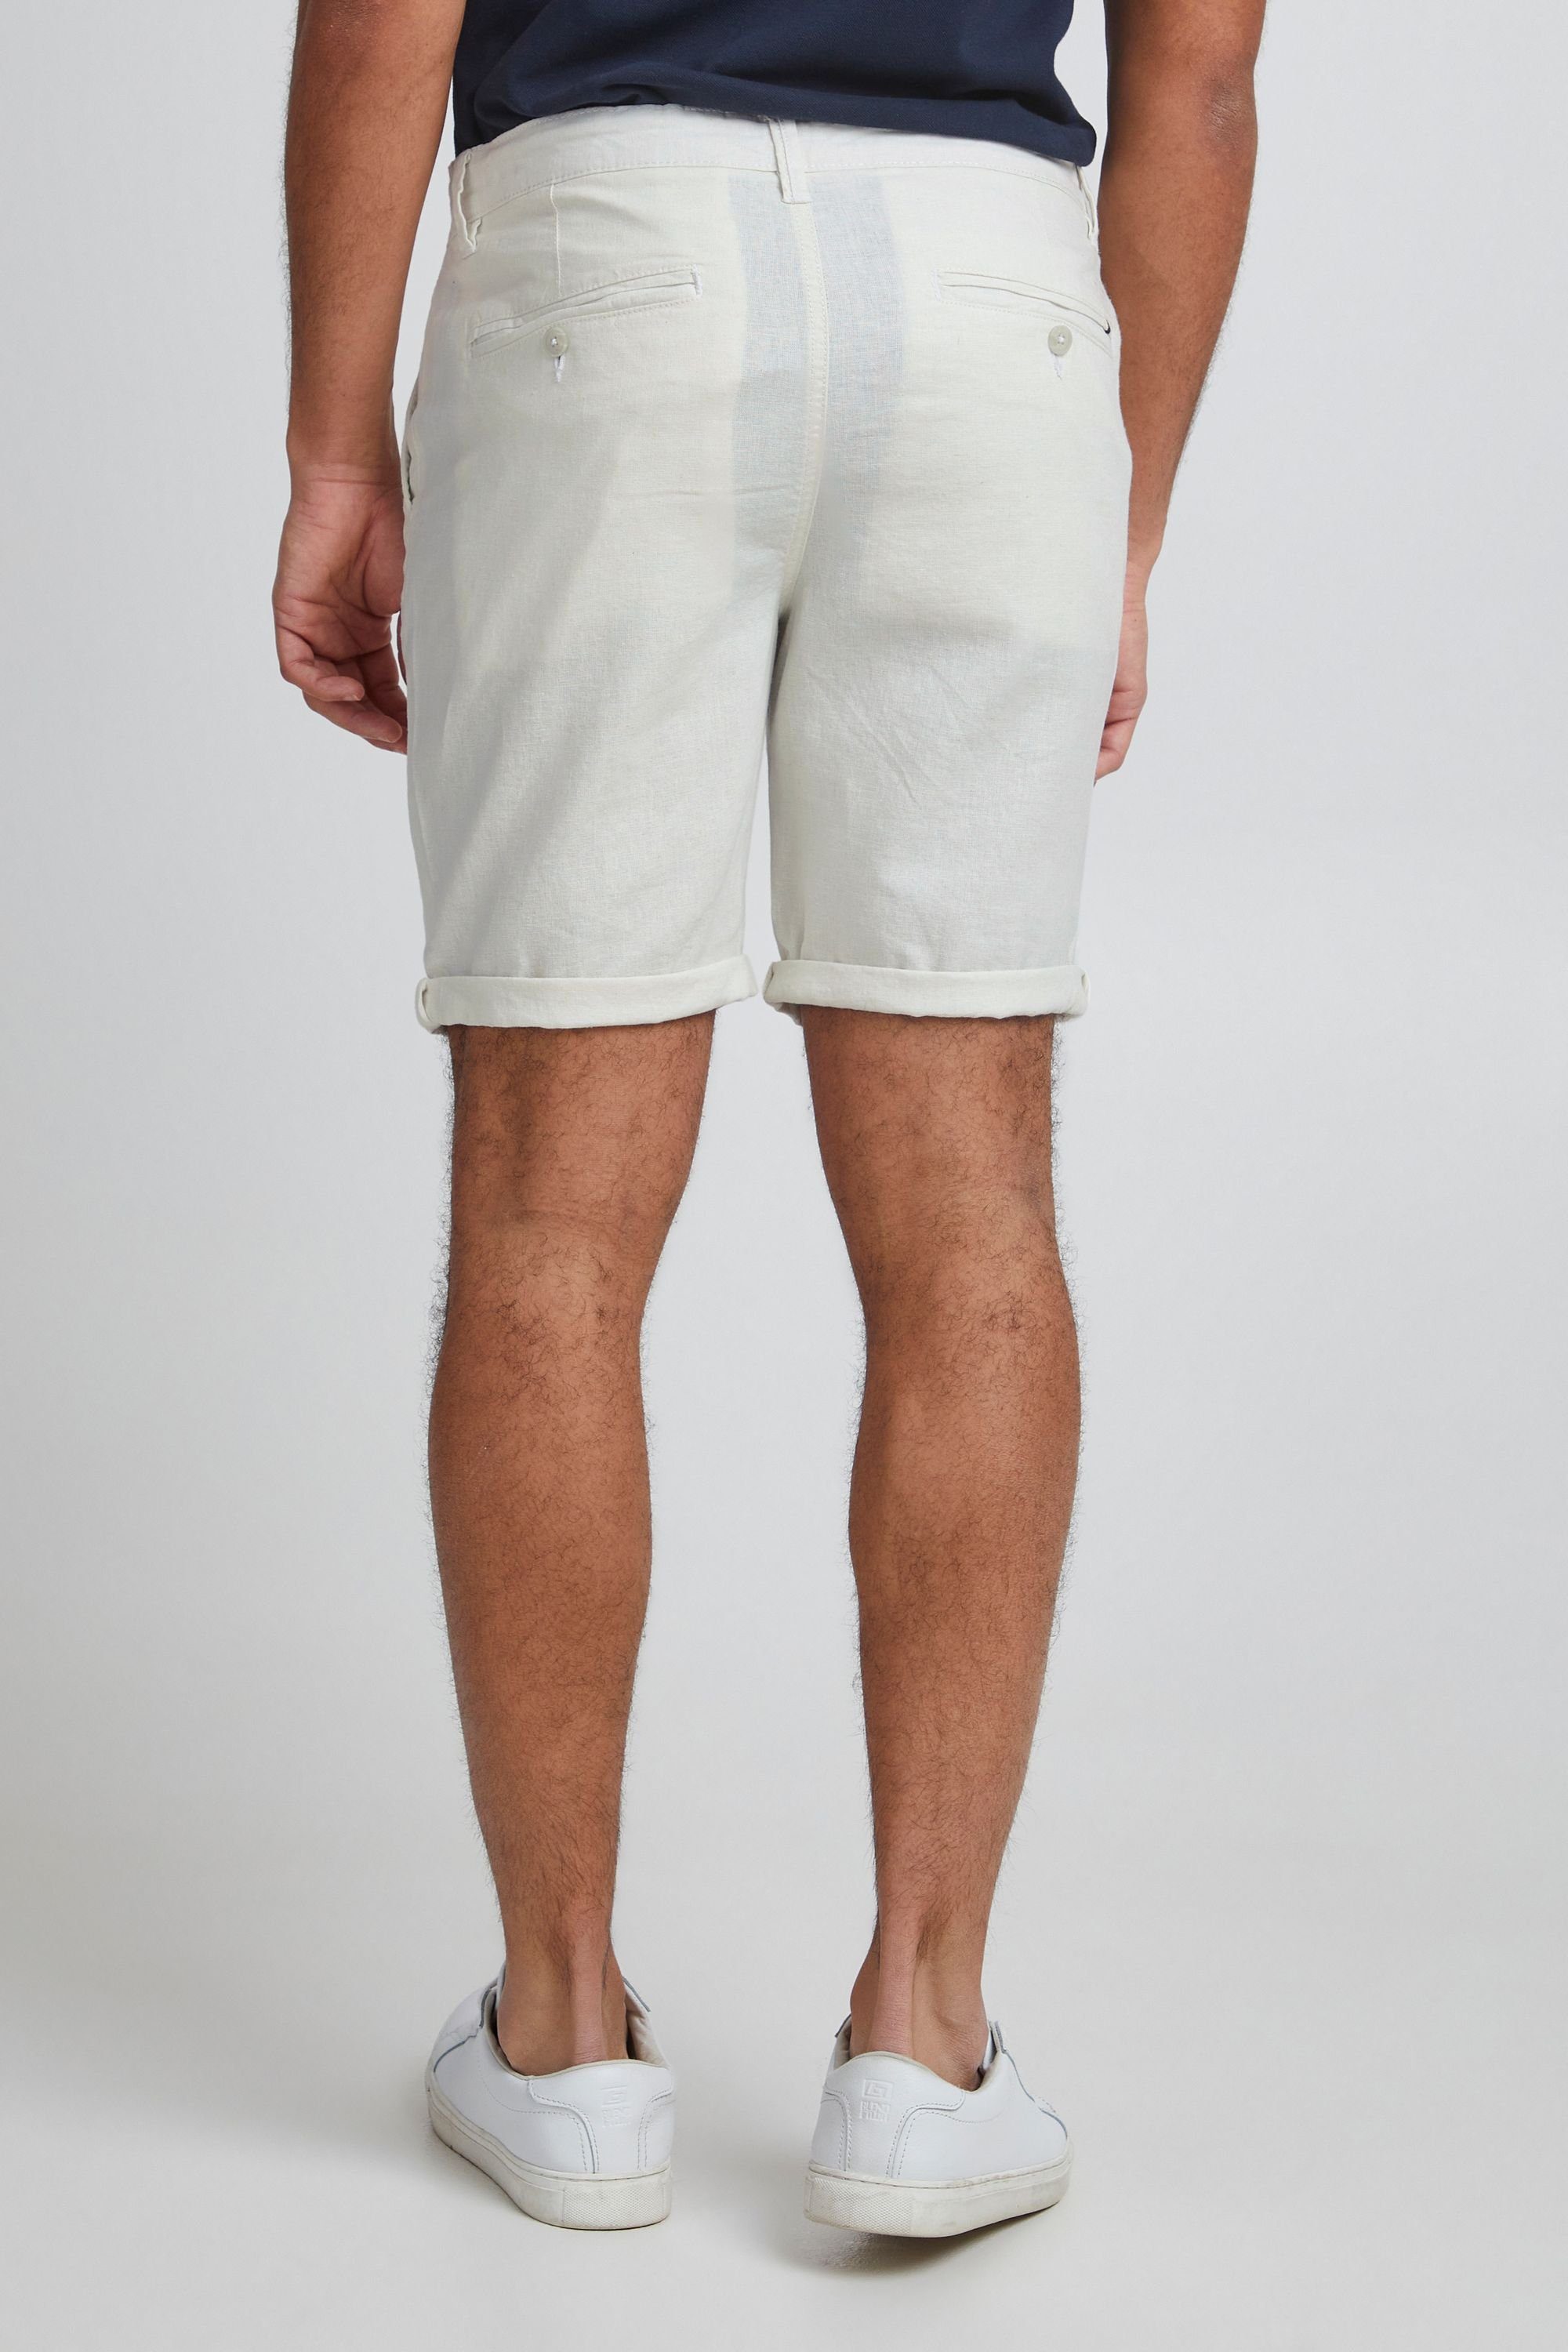 11 Project White Off Project 11 Shorts PROeysted